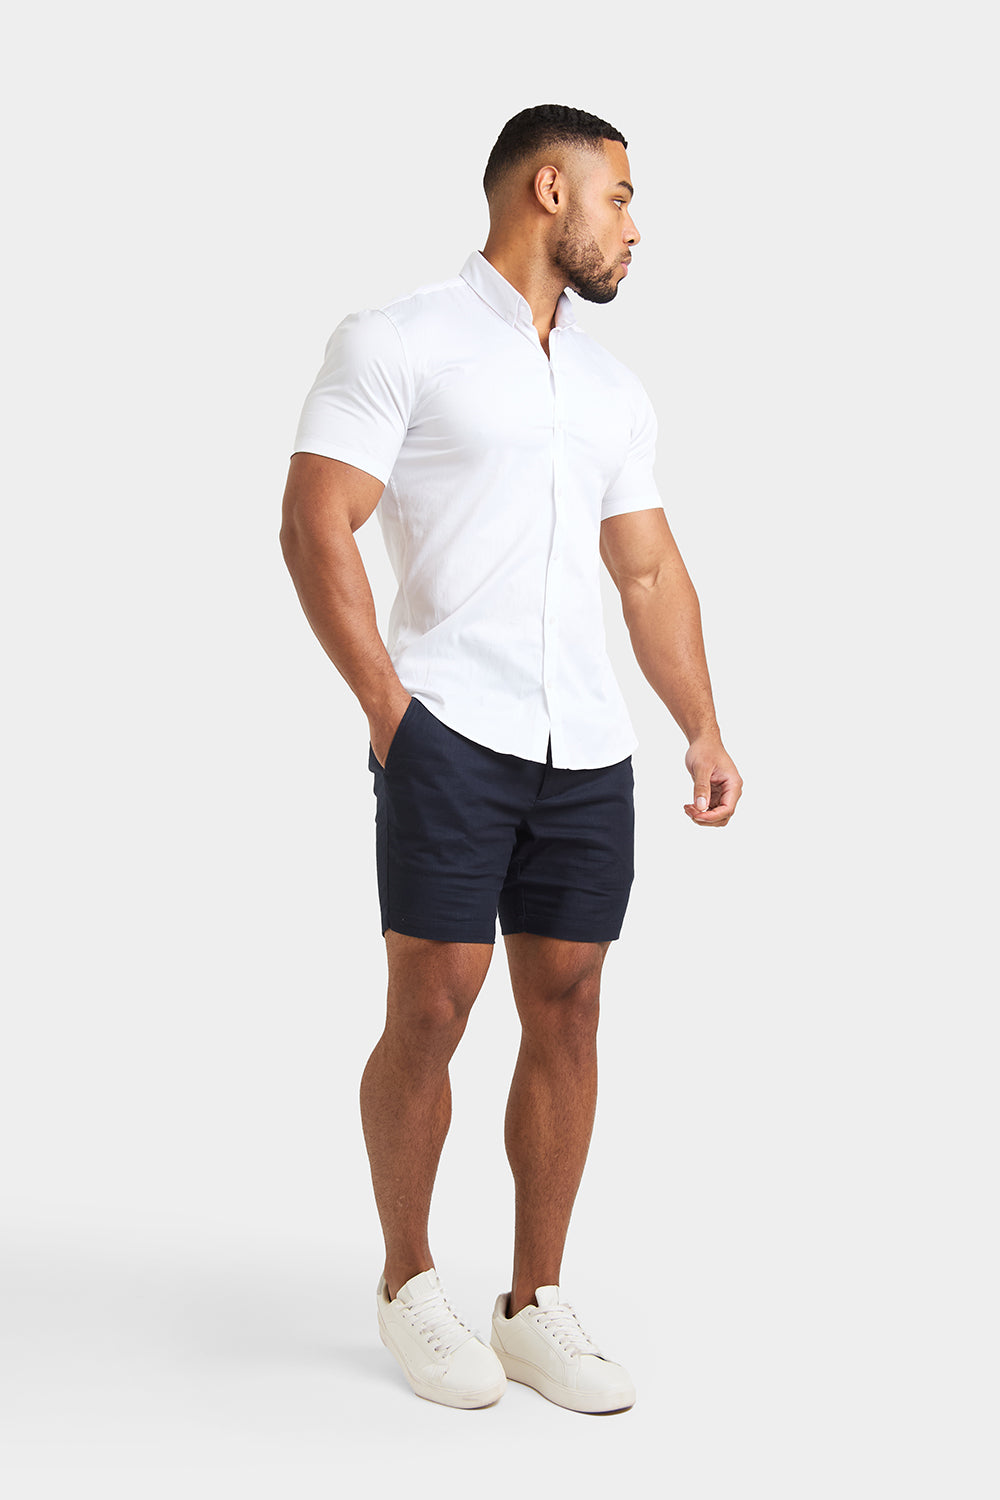 Linen Blend Shorts in Navy - TAILORED ATHLETE - ROW